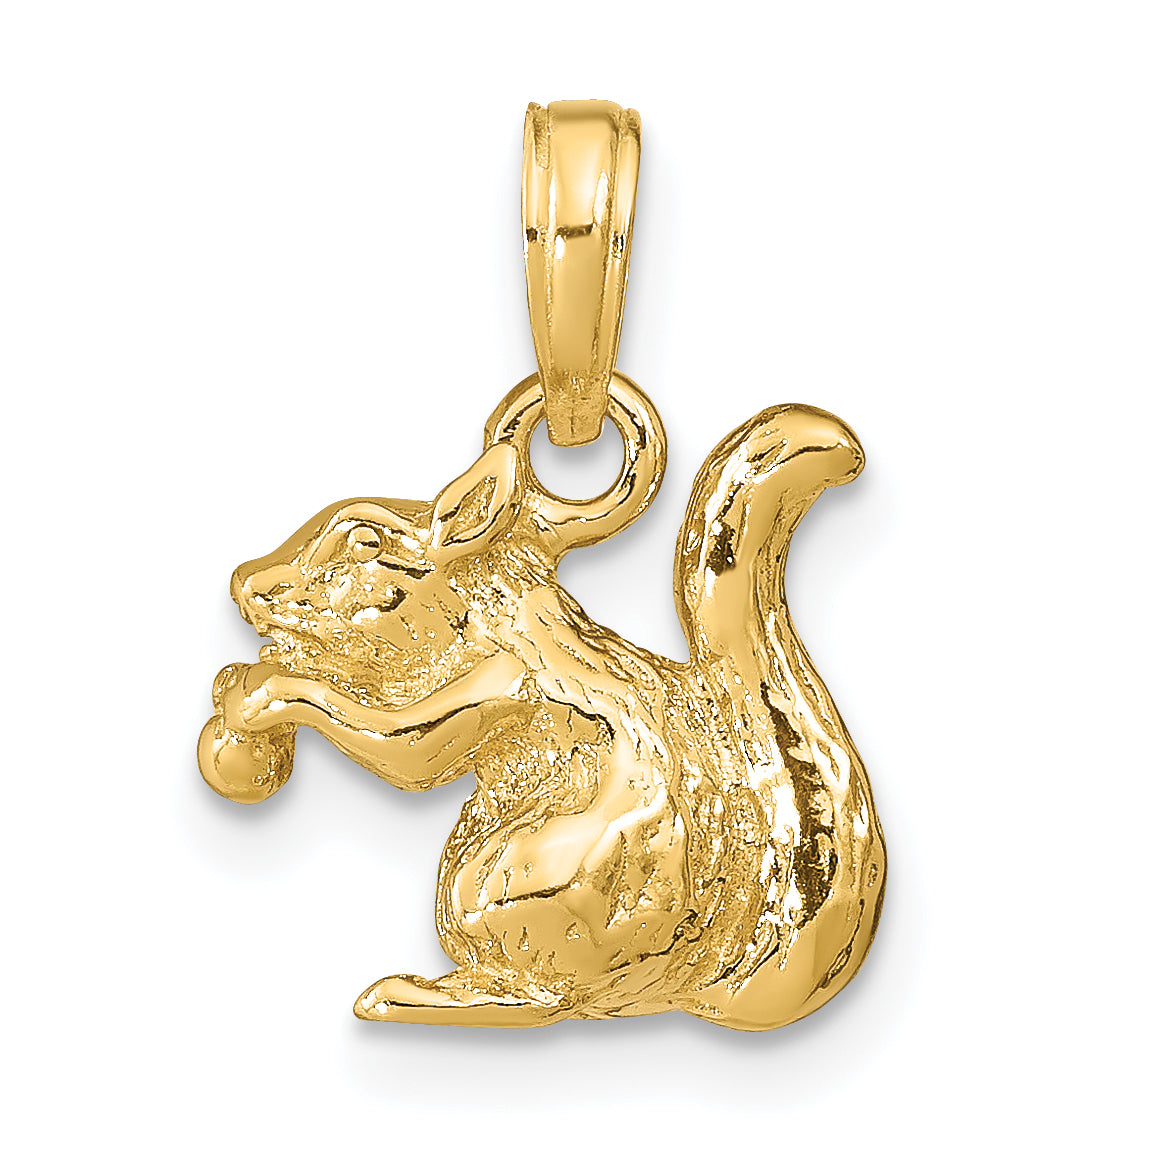 14k Solid 3-D Squirrel with Nut Charm